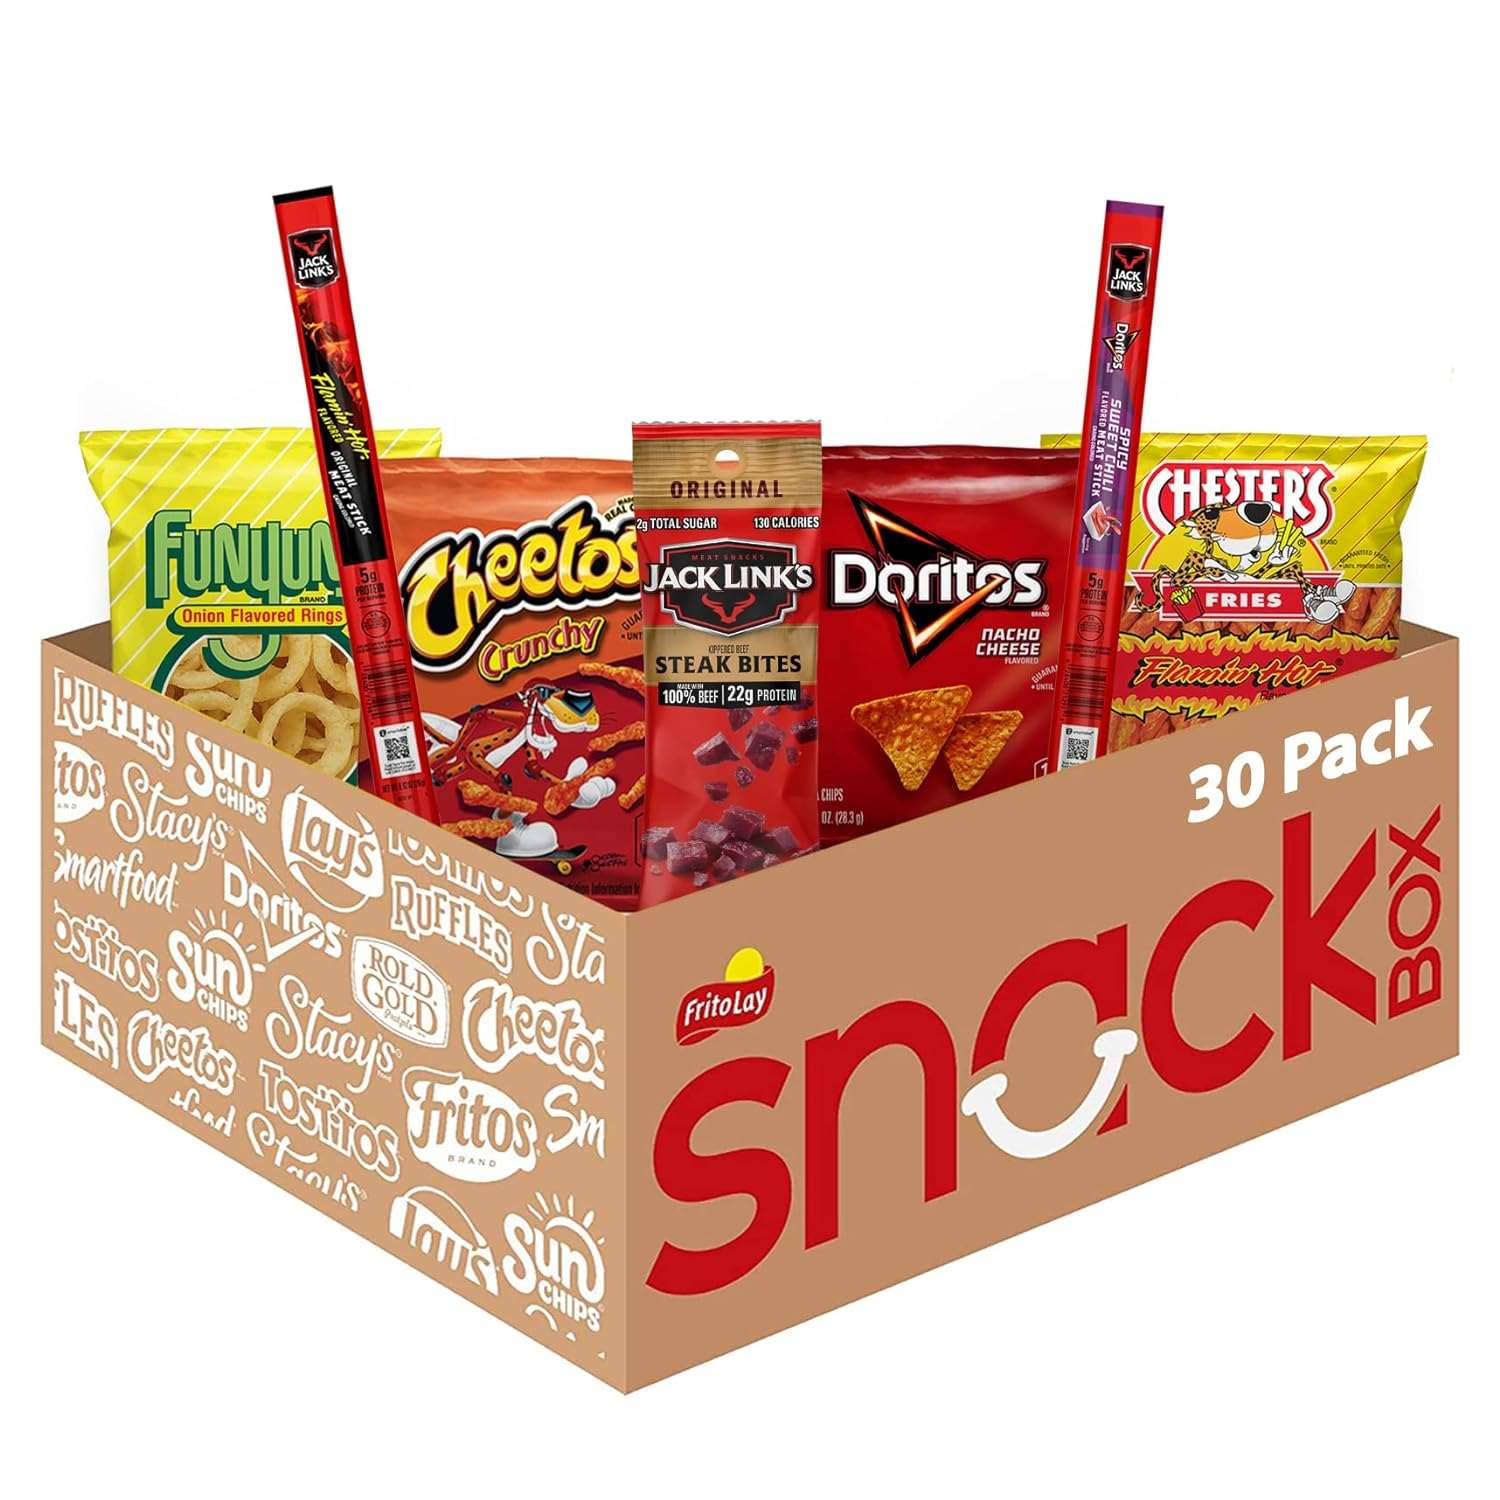 Wholesale prices with free shipping all over United States Classic Snack Care Package - Steven Deals